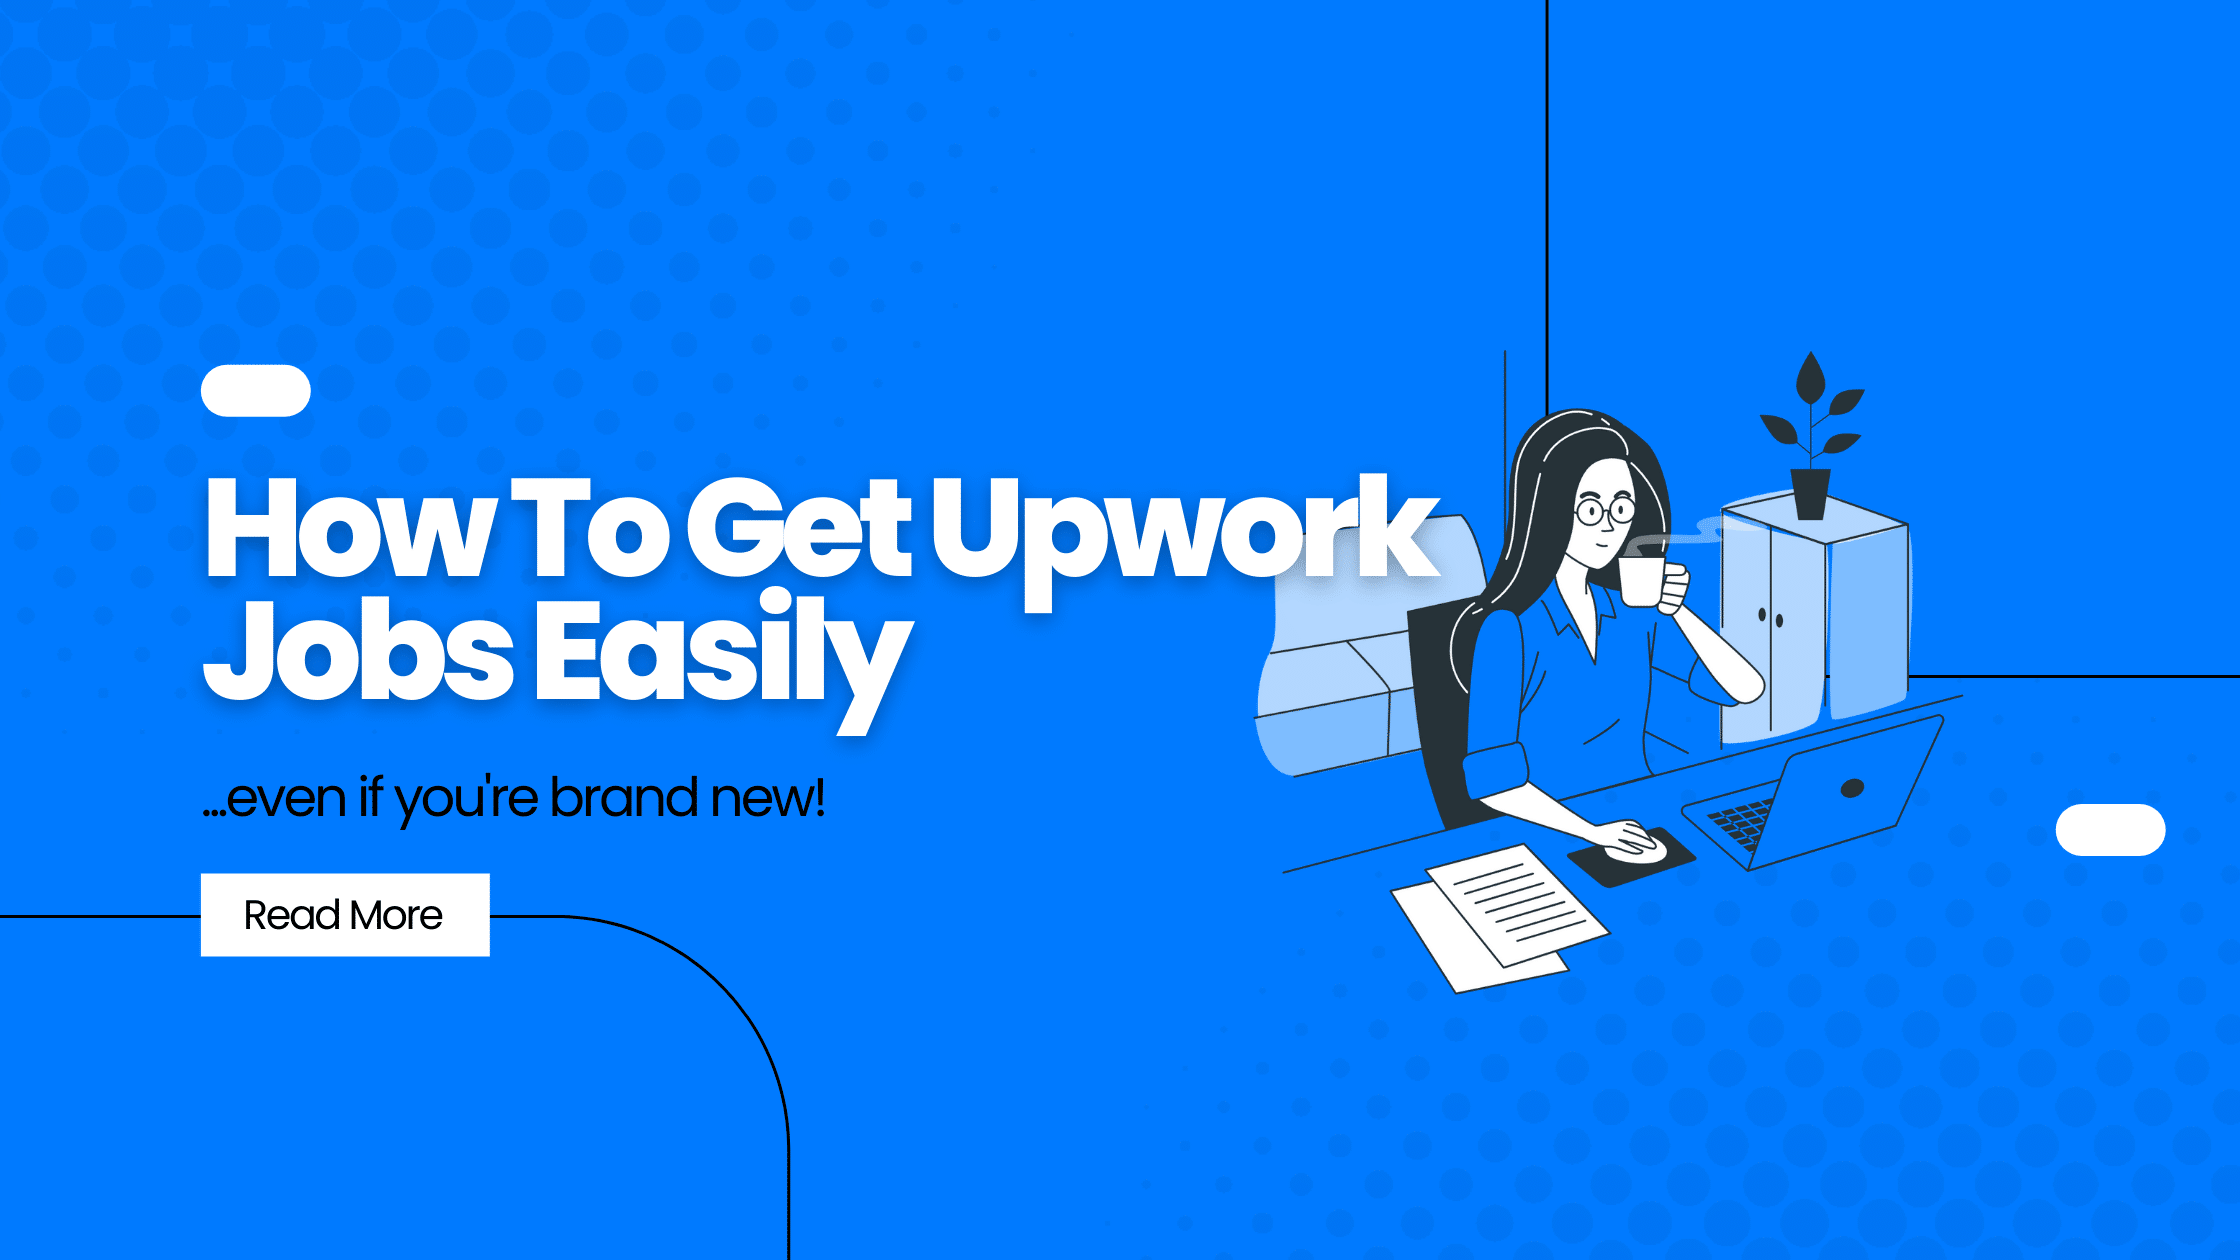 How to Get Upwork Jobs Easily